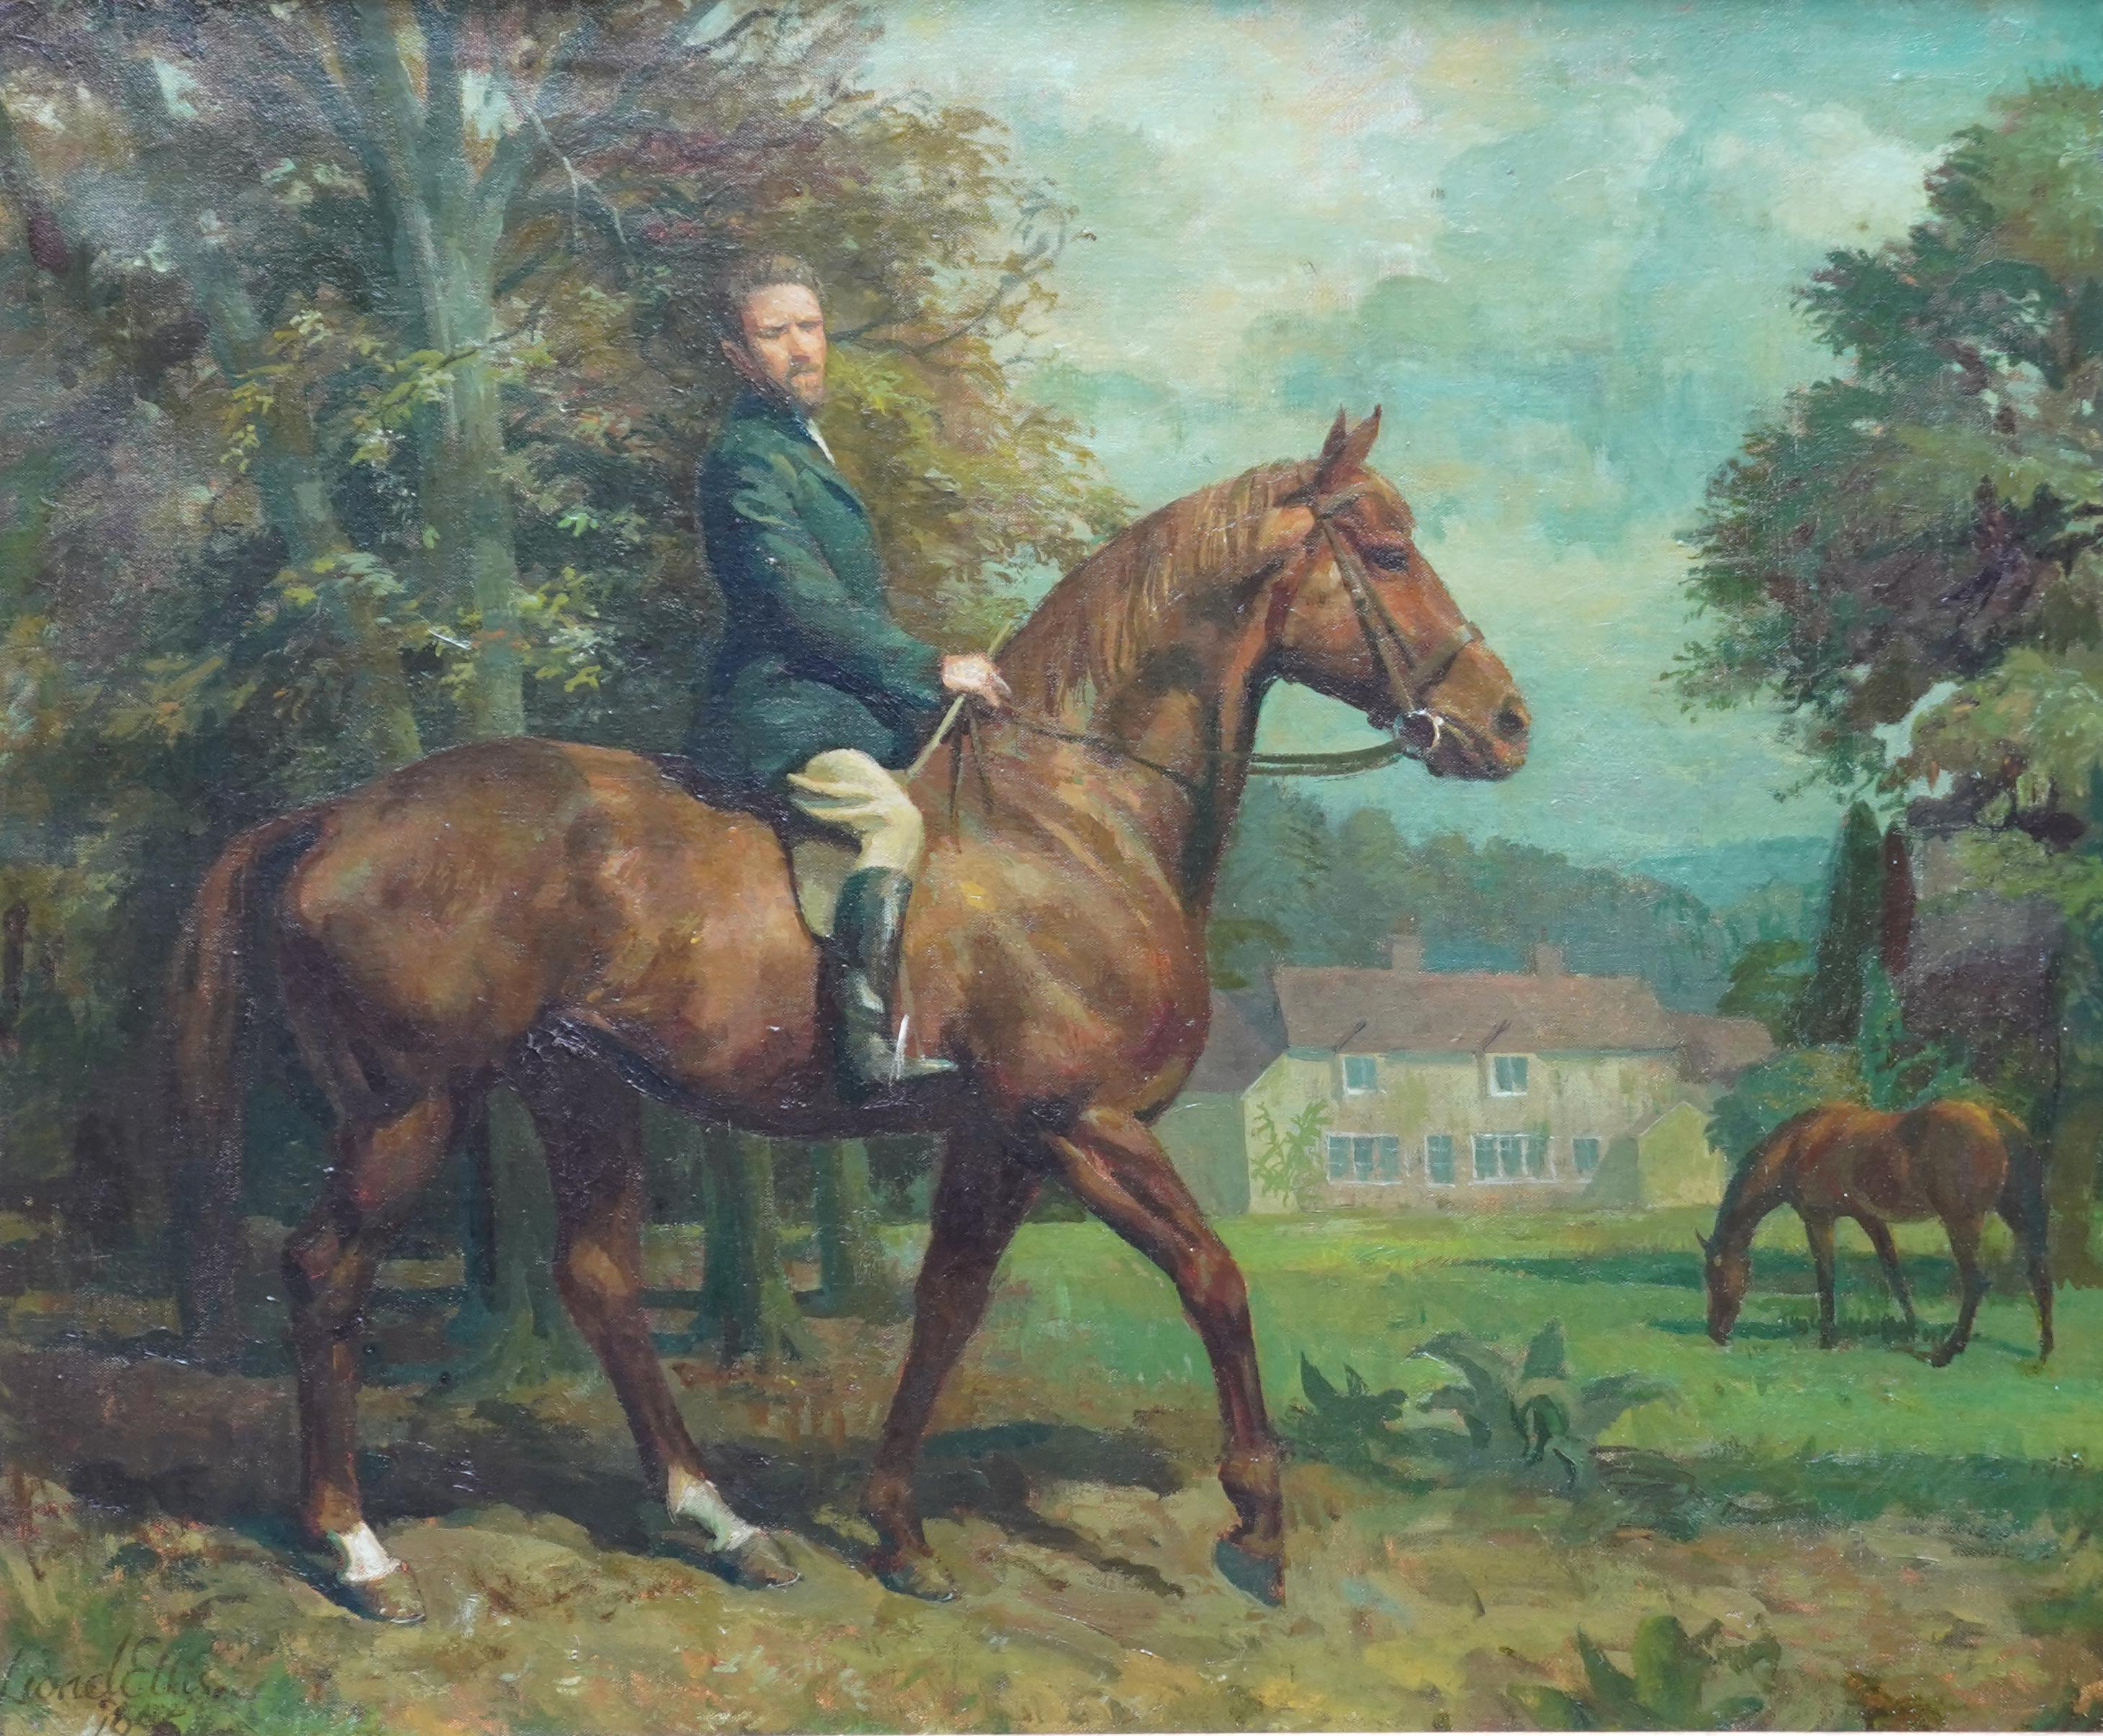 Self Portrait on Horse in Landscape - British 50's art equine rider oil painting For Sale 6